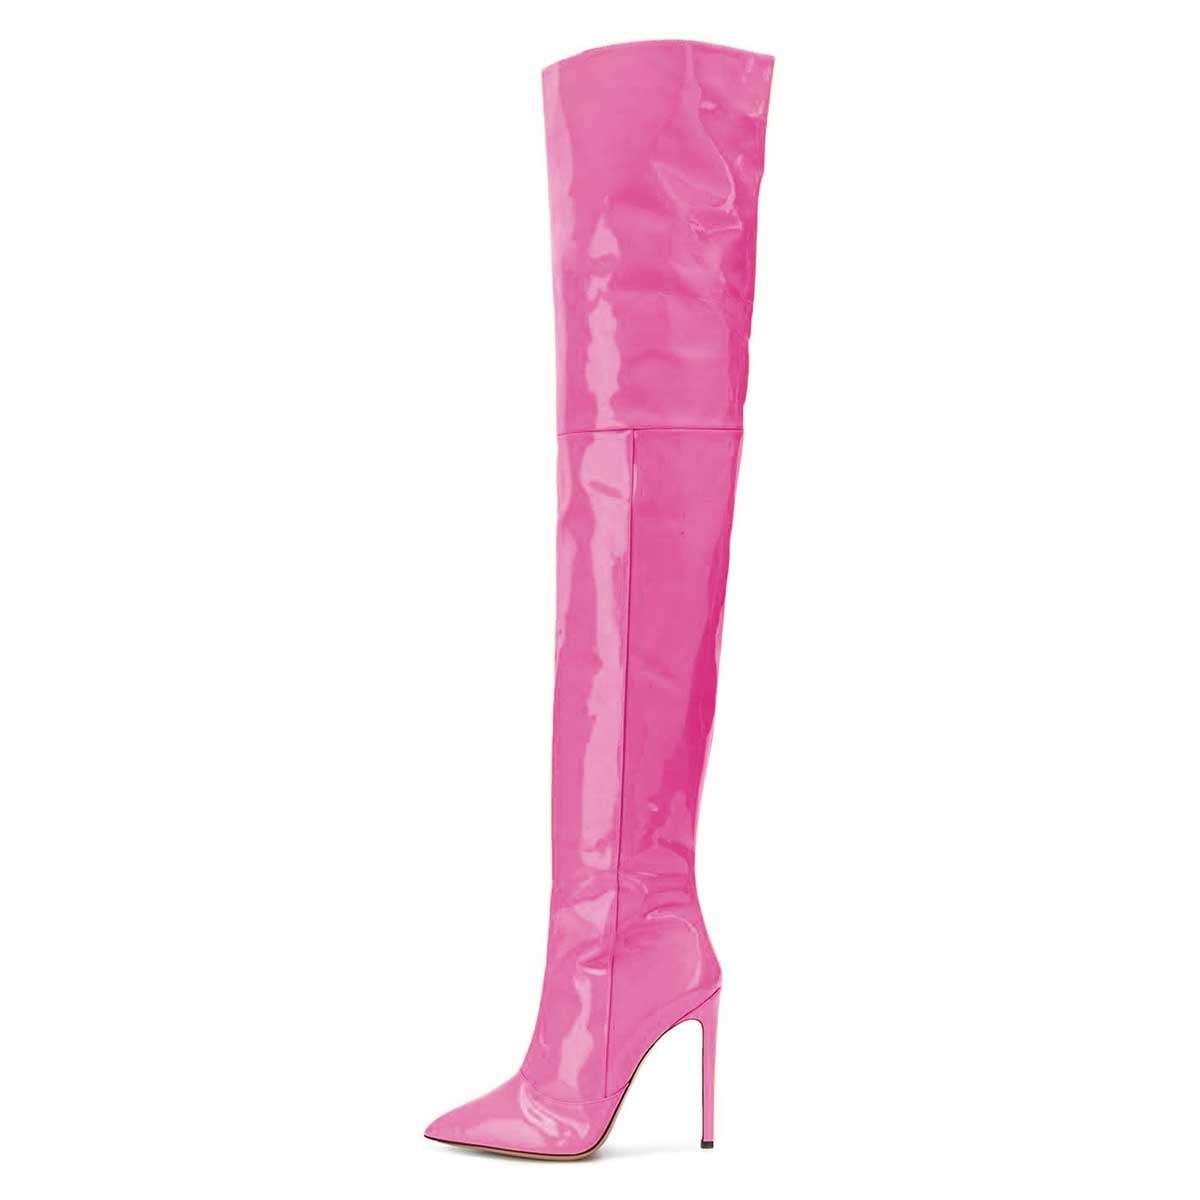 Hot Pink Patent Leather Thigh High Heel Boots Fsjshoes